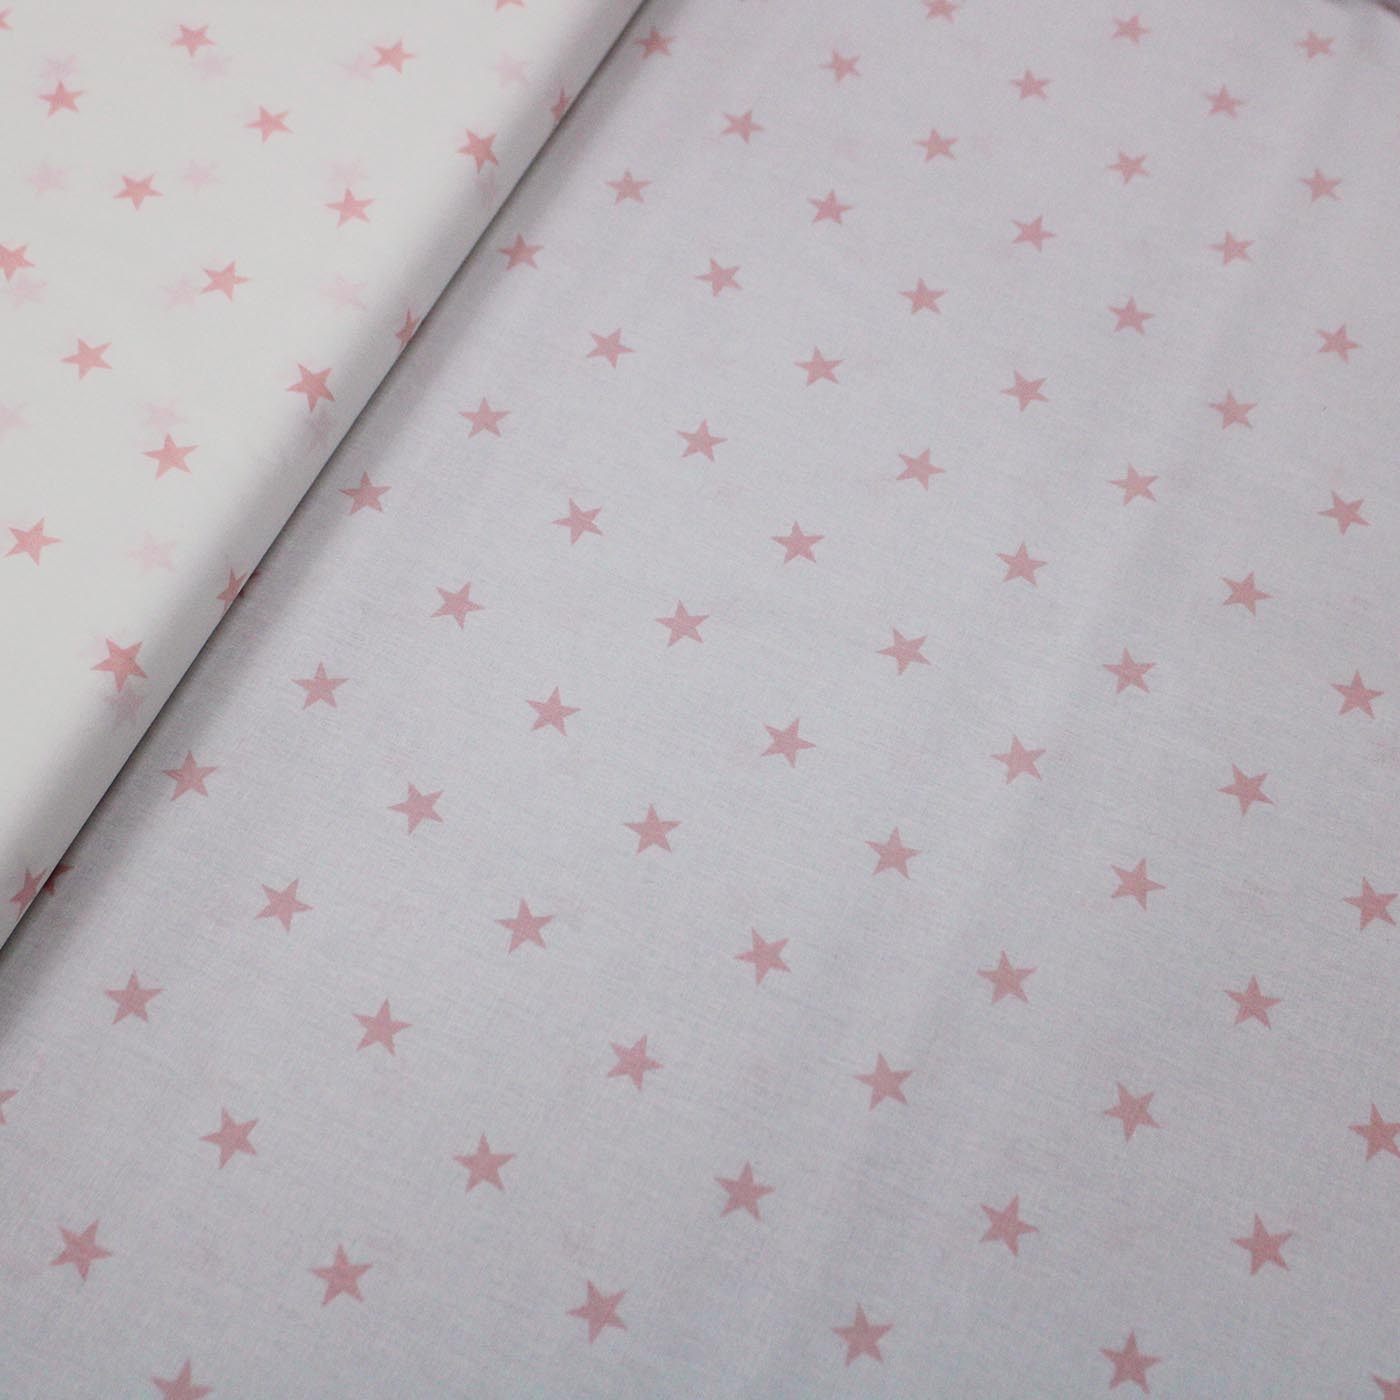 Star patterned cotton